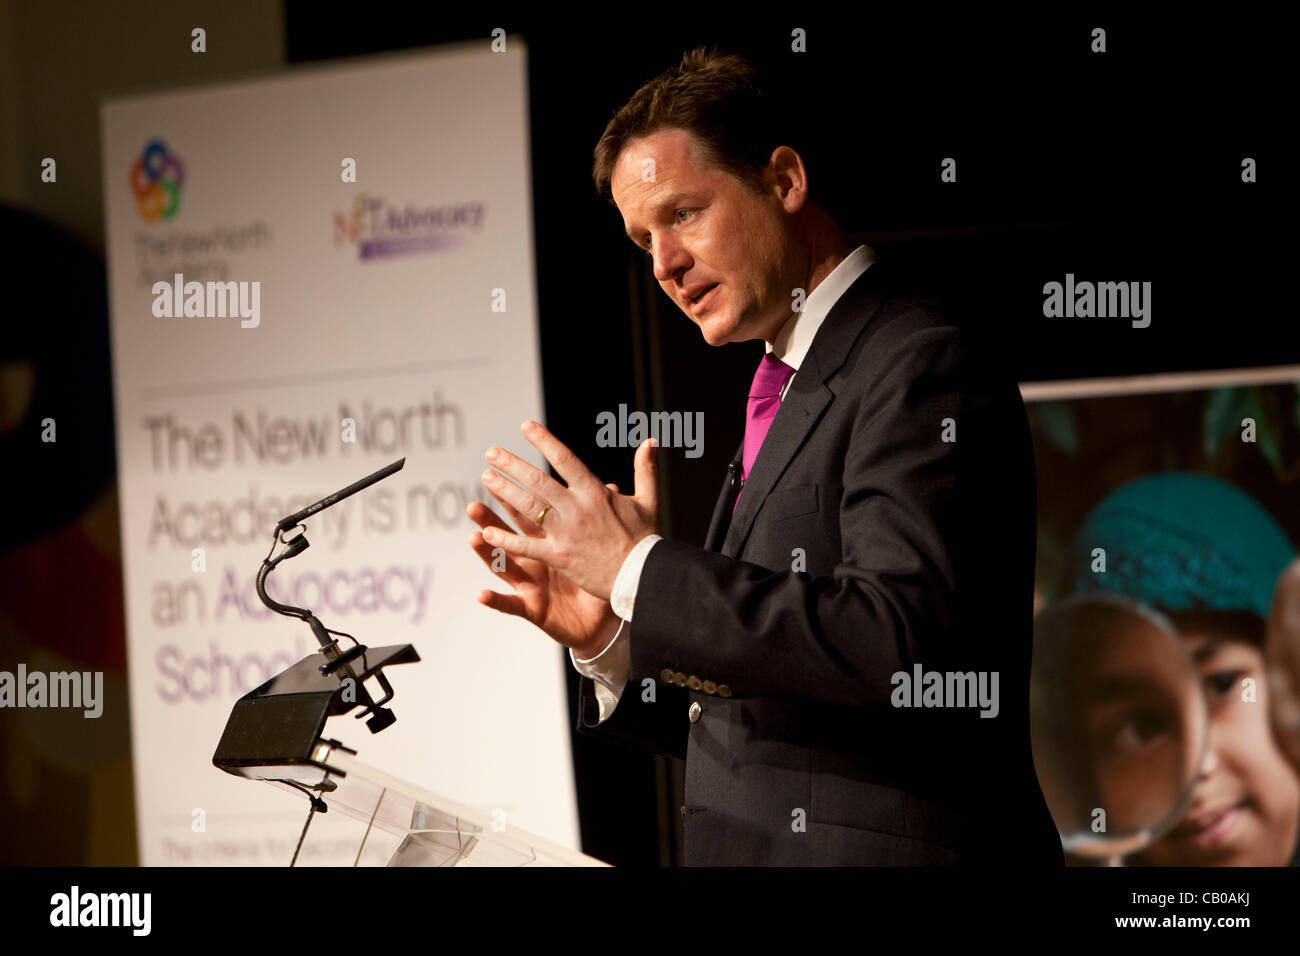 UK, LONDON- May 14,2012:Nick Clegg, British Deputy Prime Minister visits the New North Academy, a primary school in Islington, London. He gave a speech on 'pupil premium' & met pupils. Pupil premium is a policy where schools will be asked to compete to find the best way of spending Government money. Stock Photo